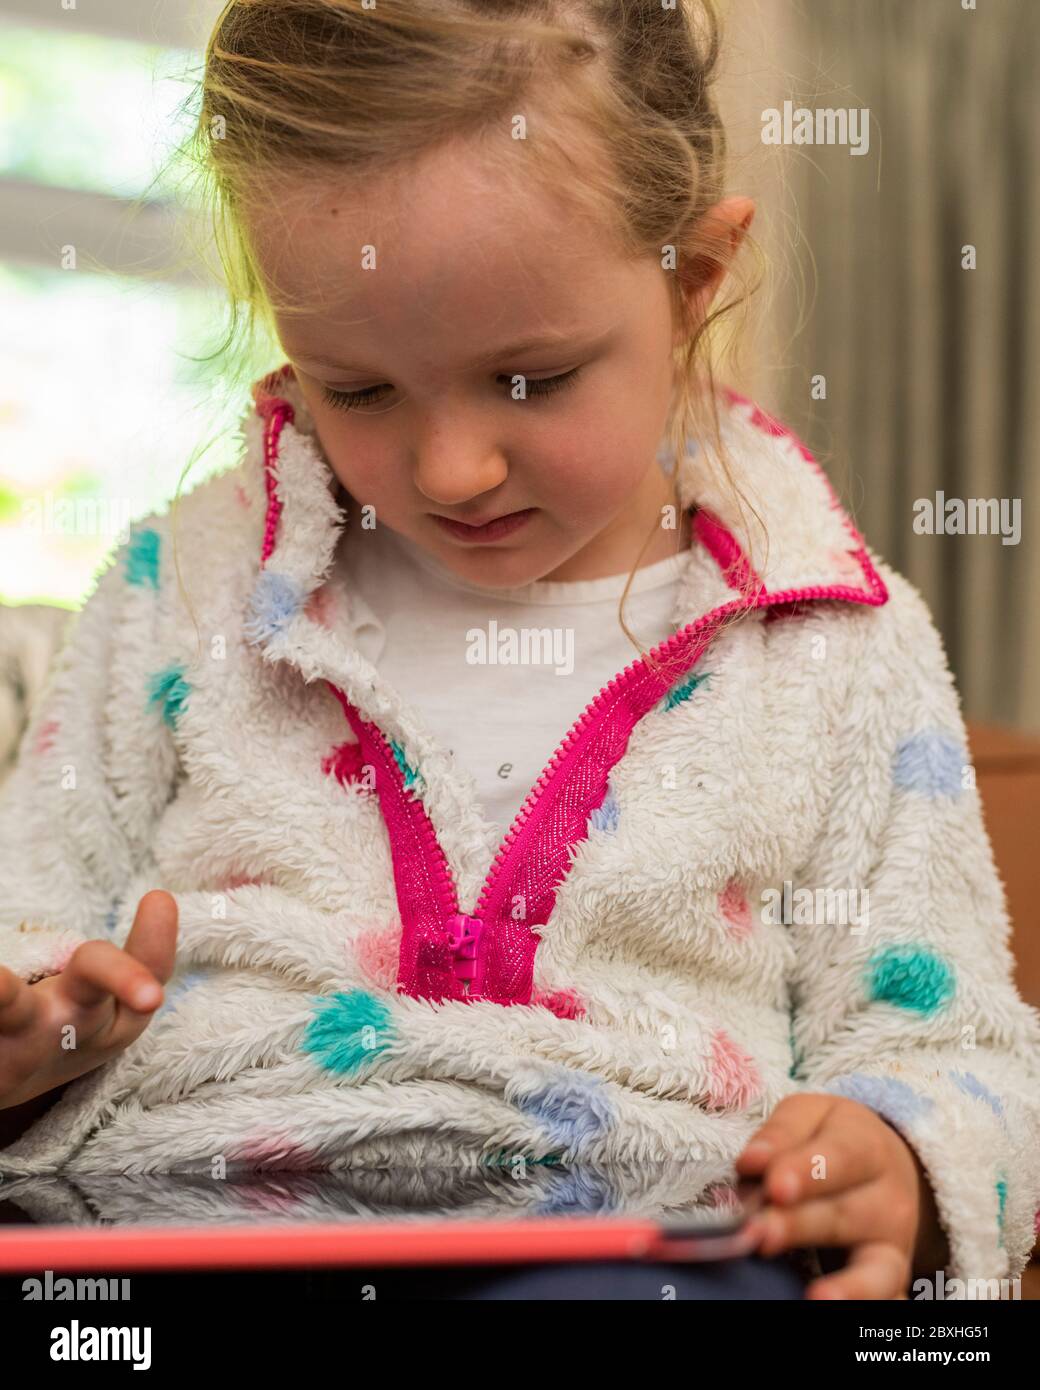 Pre-school girl looking at tablet, little girl playing with tablet, sitting on sofa playing with tablet, girl sitting on sofa playing on tablet Stock Photo